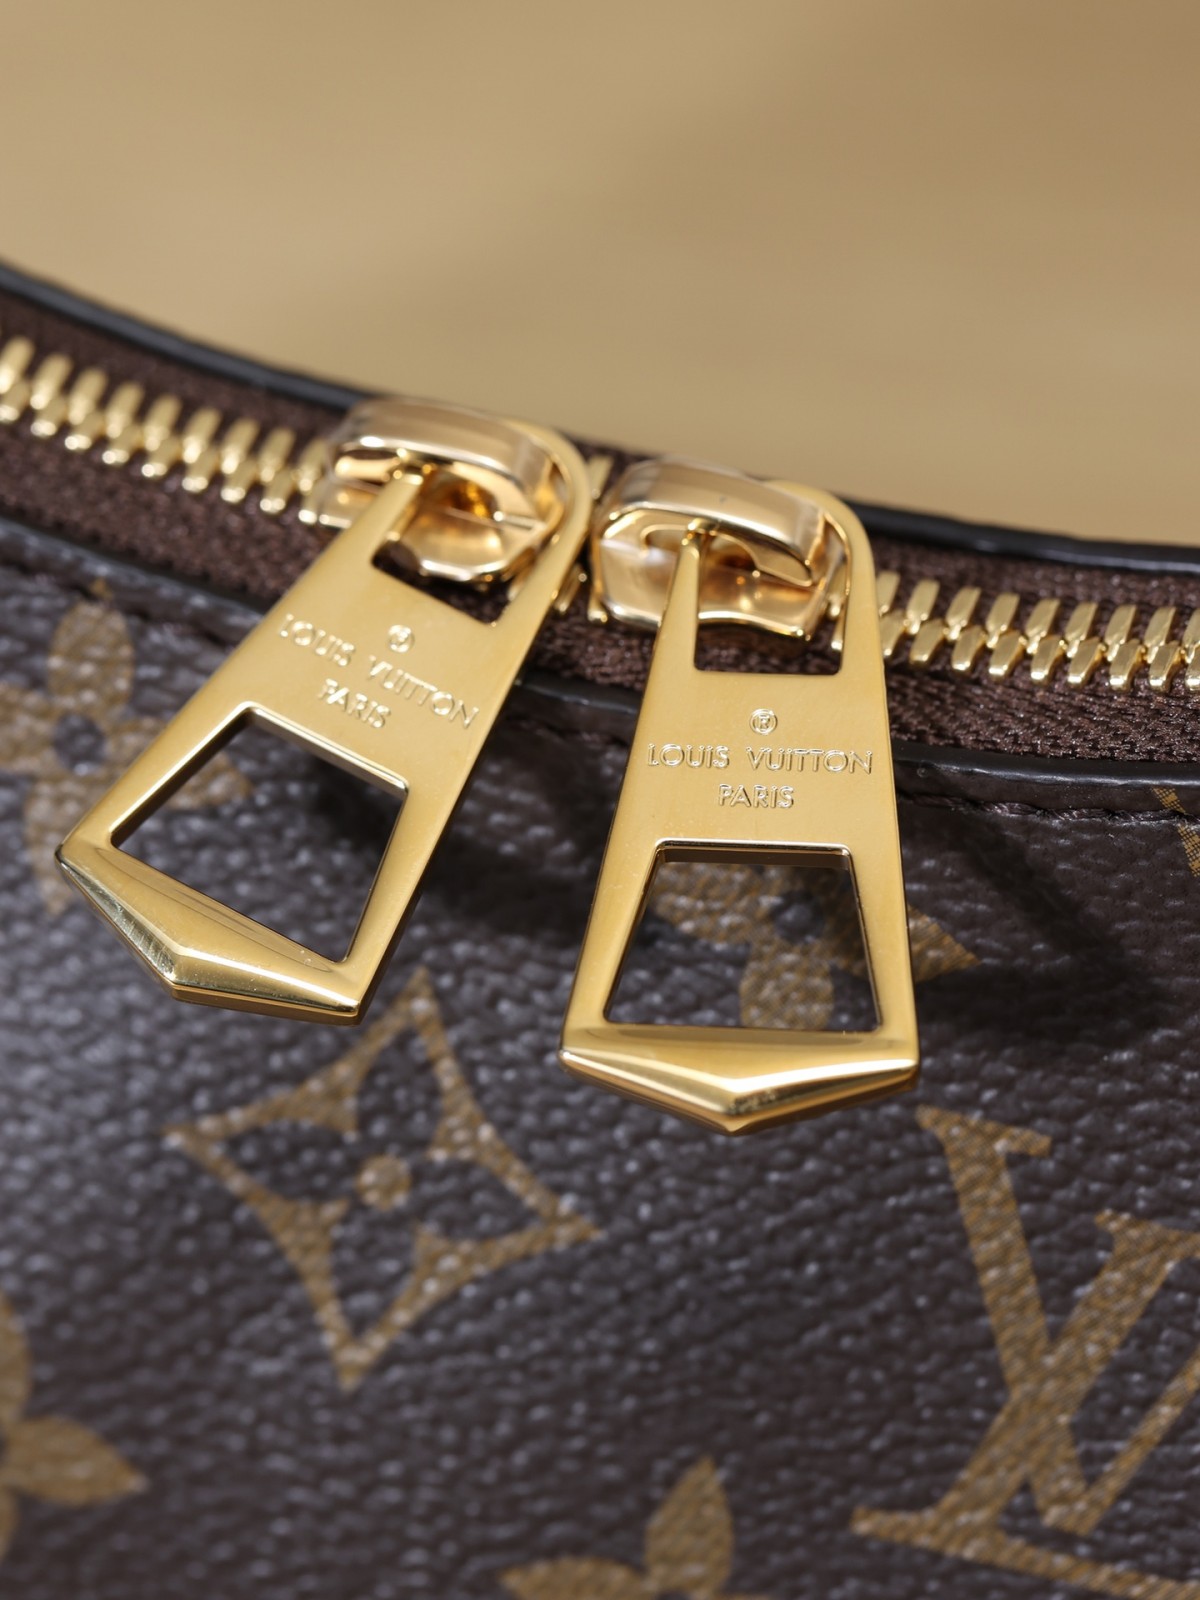 How good quality is a Shebag replica Louis Vuitton Boulogne bag? (2023 updated)-Best Quality Fake Louis Vuitton Bag Online Store, Replica designer bag ru